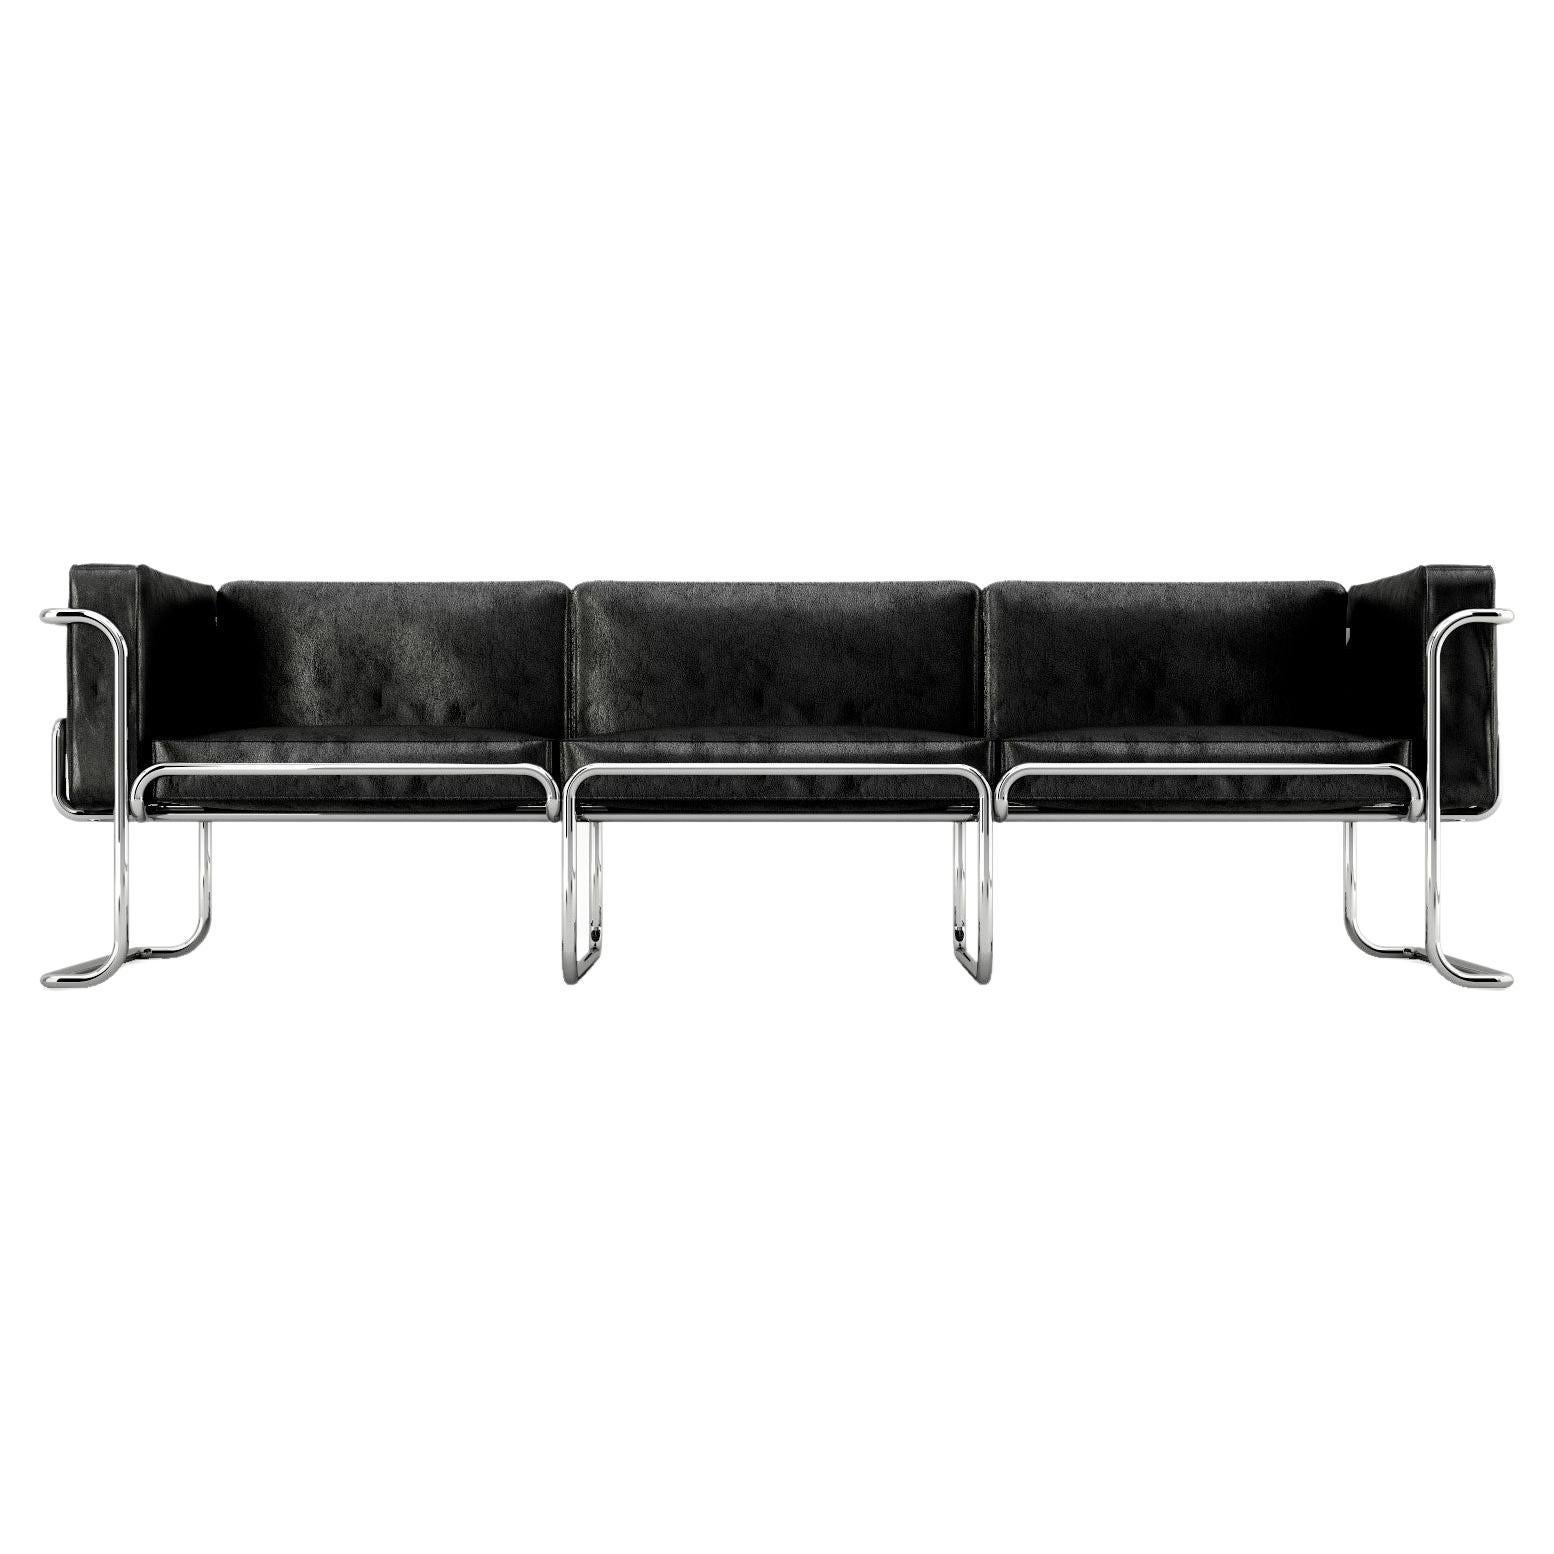 Lotus 3 Seat Sofa - Modern Black Leather Sofa with Stainless Steel Legs